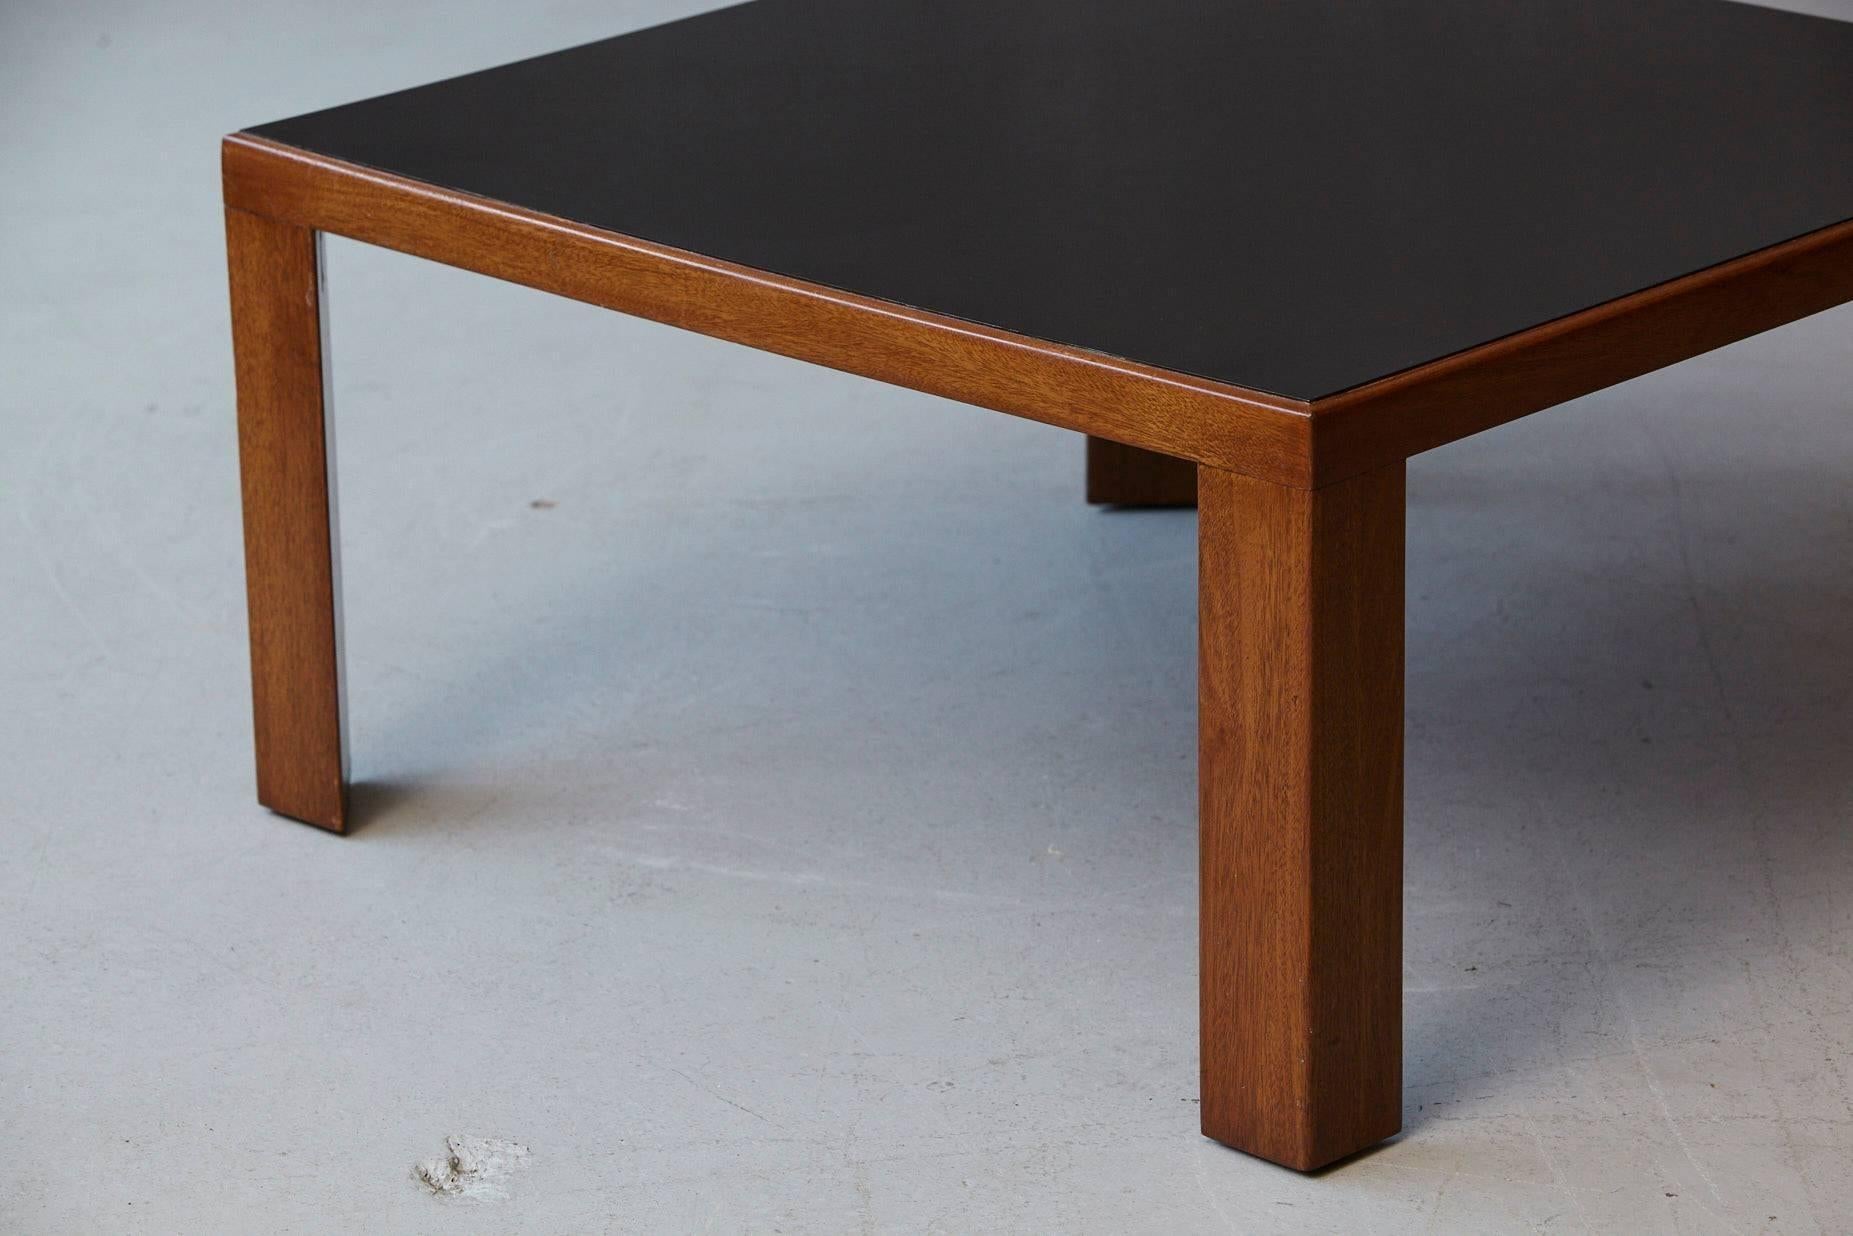 Dunbar Walnut Coffee or End Table Model # 3374 by Edward Wormley In Good Condition For Sale In Aramits, Nouvelle-Aquitaine